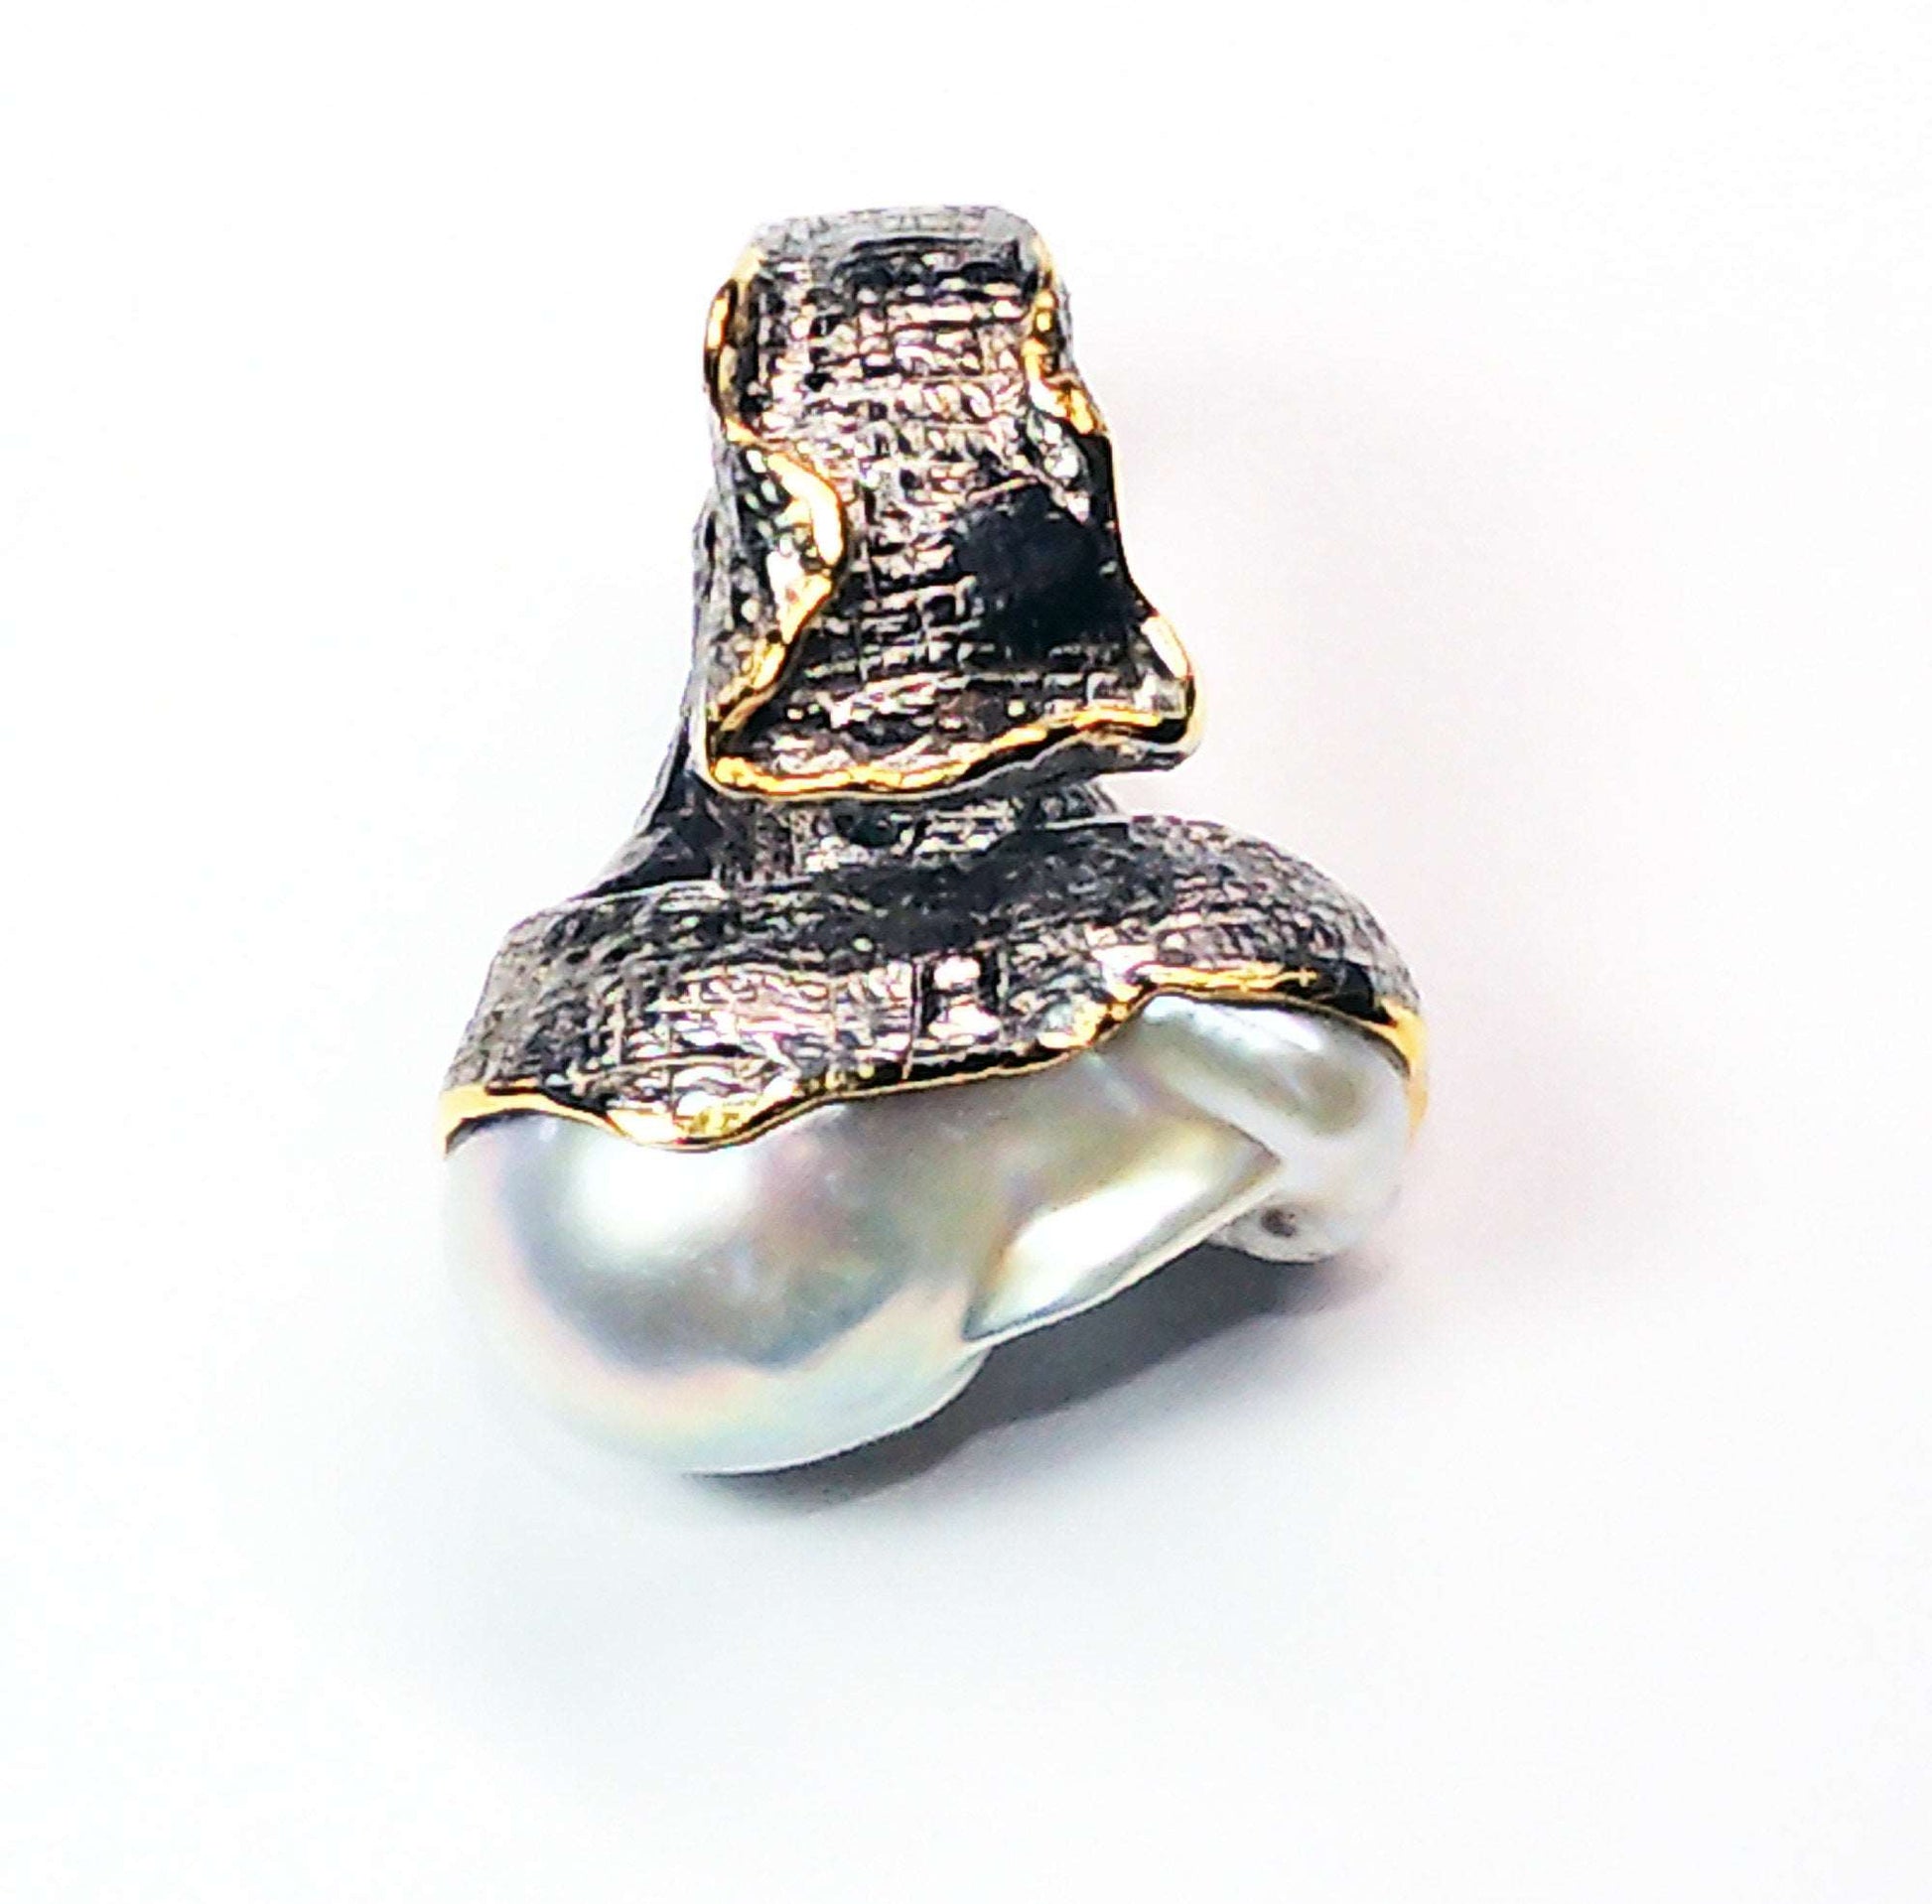 Baroque Pearl ring in sterling silver and gold overlay accents with gemstones - Providence silver gold jewelry usa